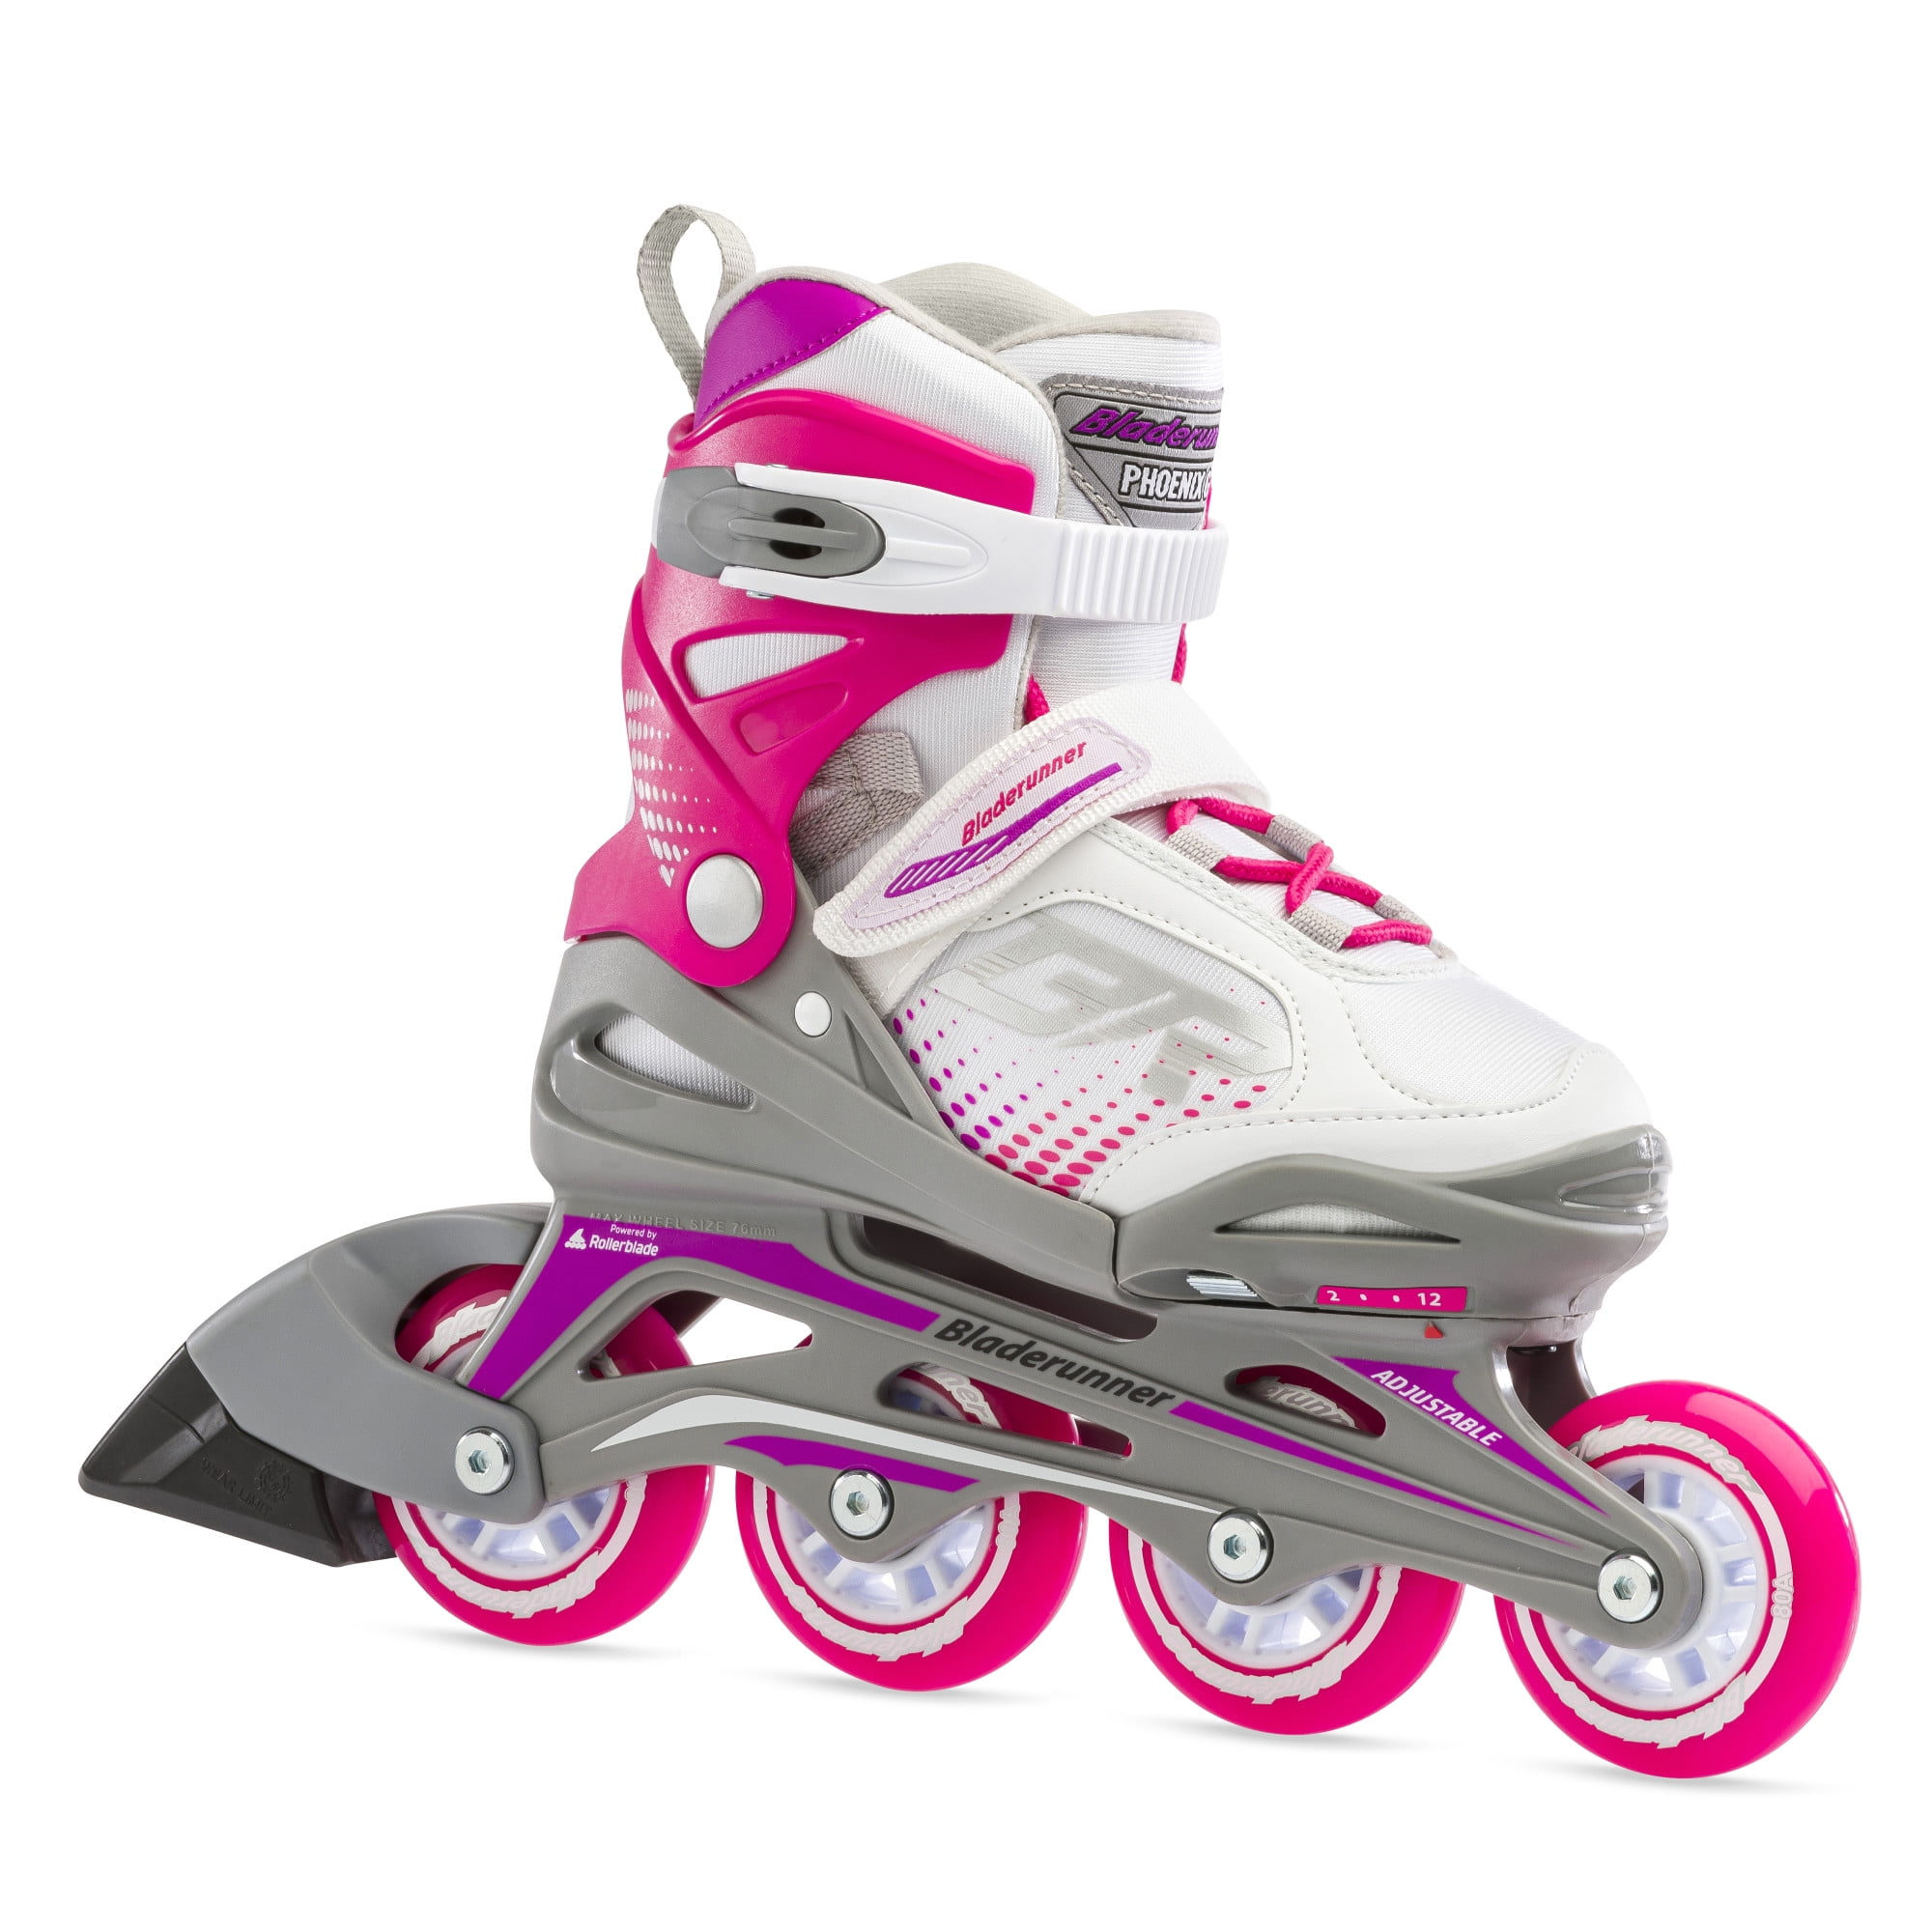 Details about   NEW Adjustable Inline Skates Roller Blades Adult Size 8-10.5 Breathable a e 142 